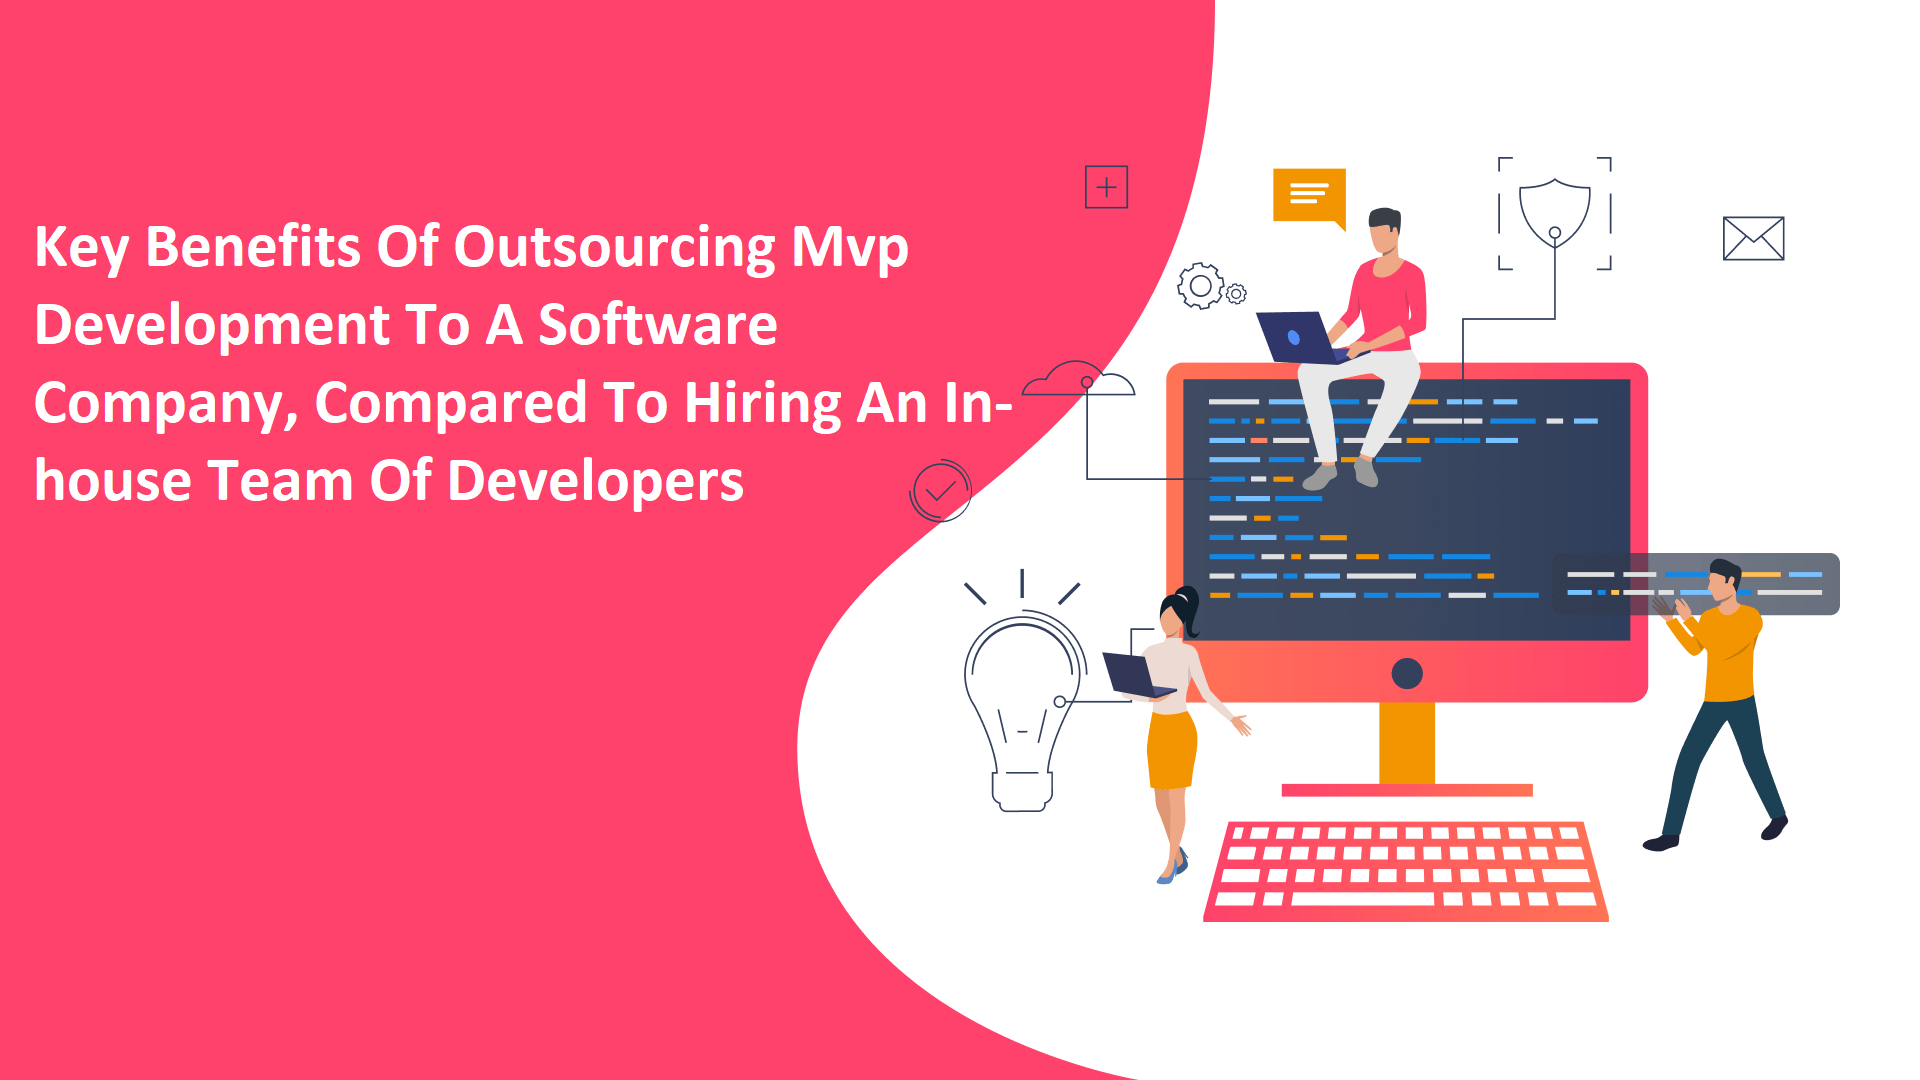 Key-Benefits-Of-Outsourcing-Mvp-Development-To-A-Software-Company-Compared-To-Hiring-An-In-house-Team-Of-Developers.png